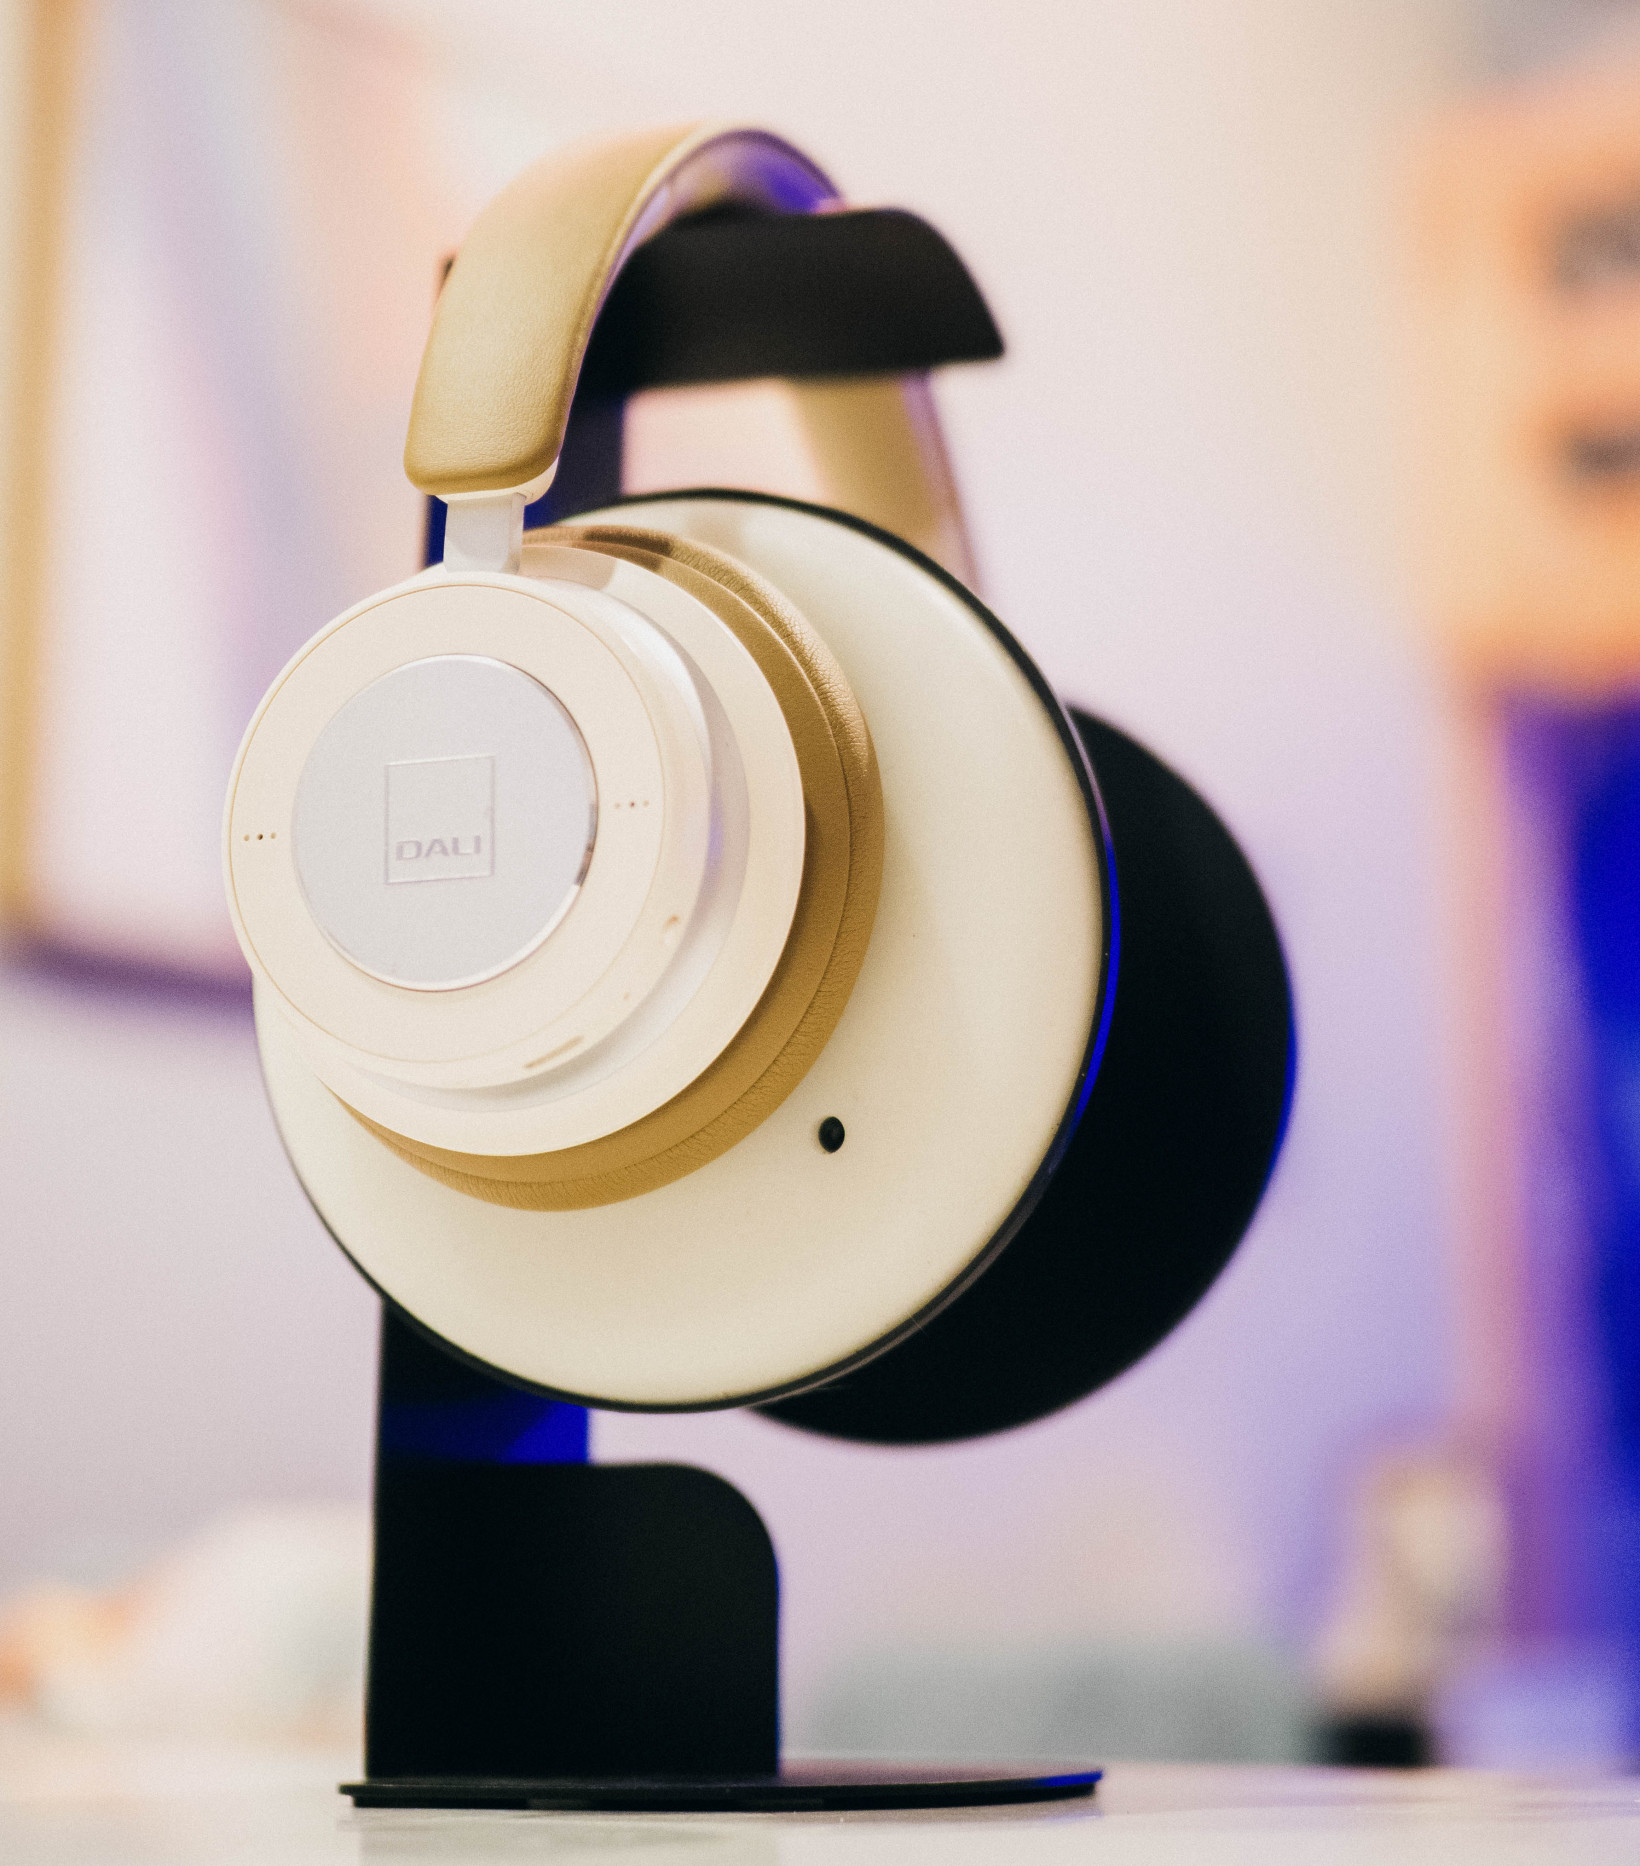 Review: Dali’s IO-6 are a new contender for best noise-canceling headphones 7